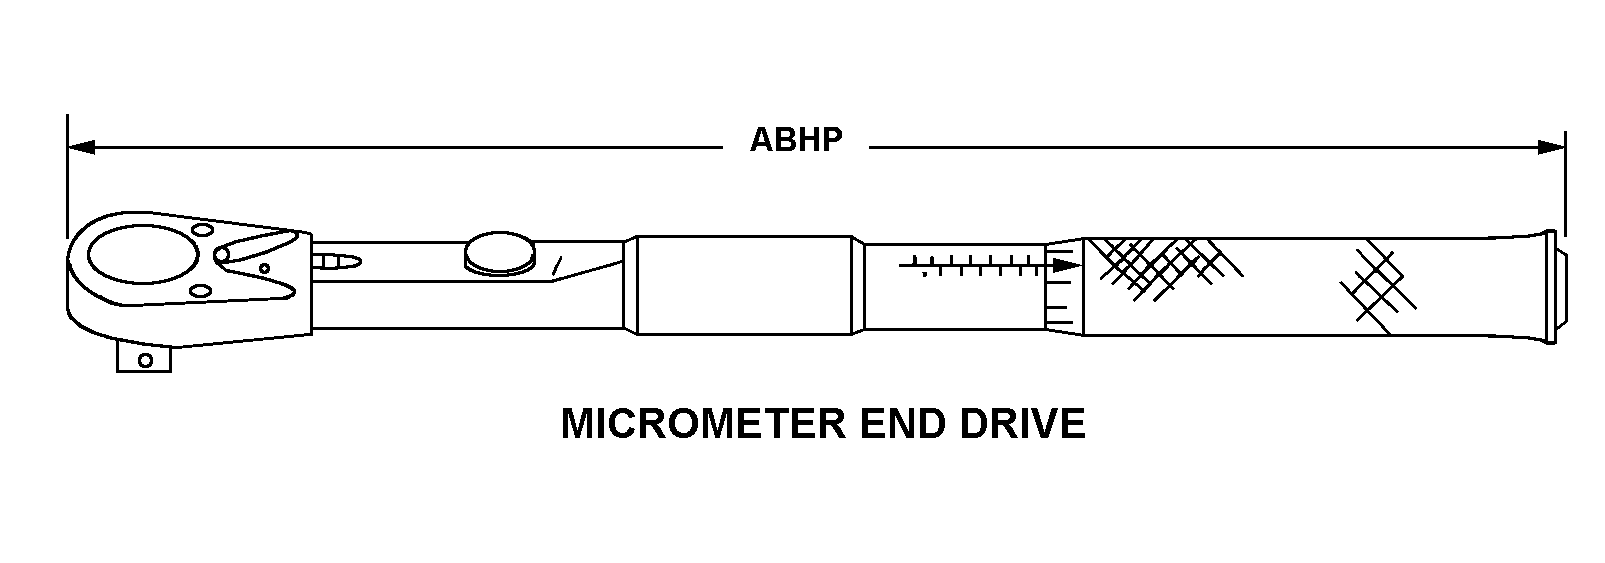 MICROMETER END DRIVE style nsn 5120-01-474-5098